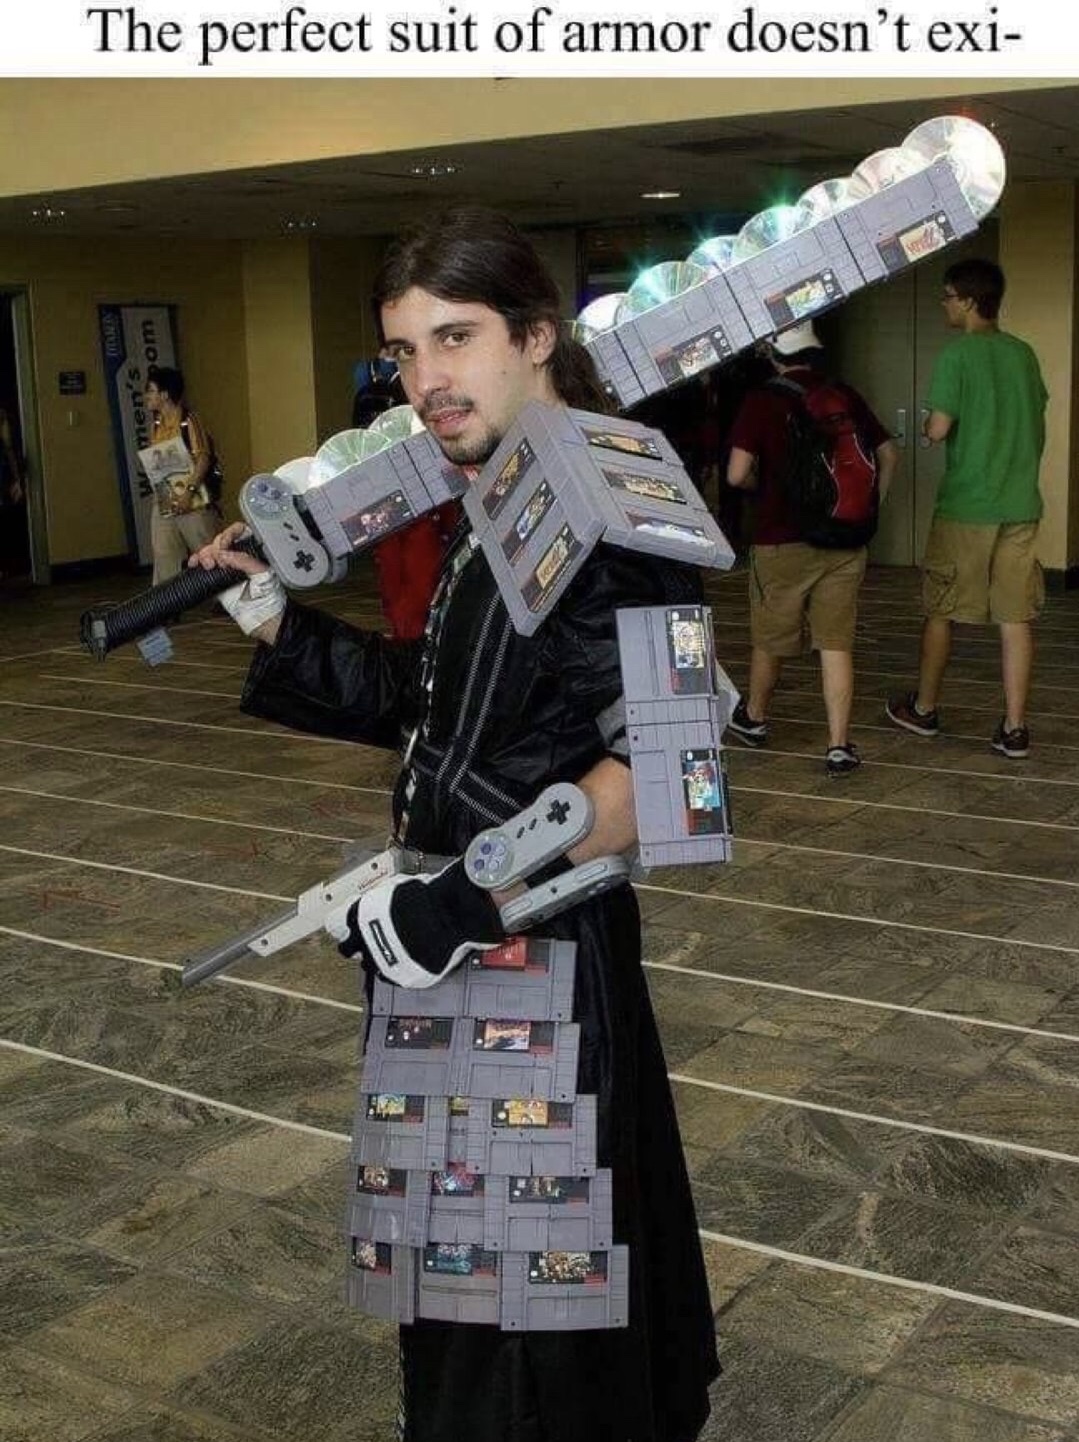 Friday TGIF meme about building an armor made of old game cartridges